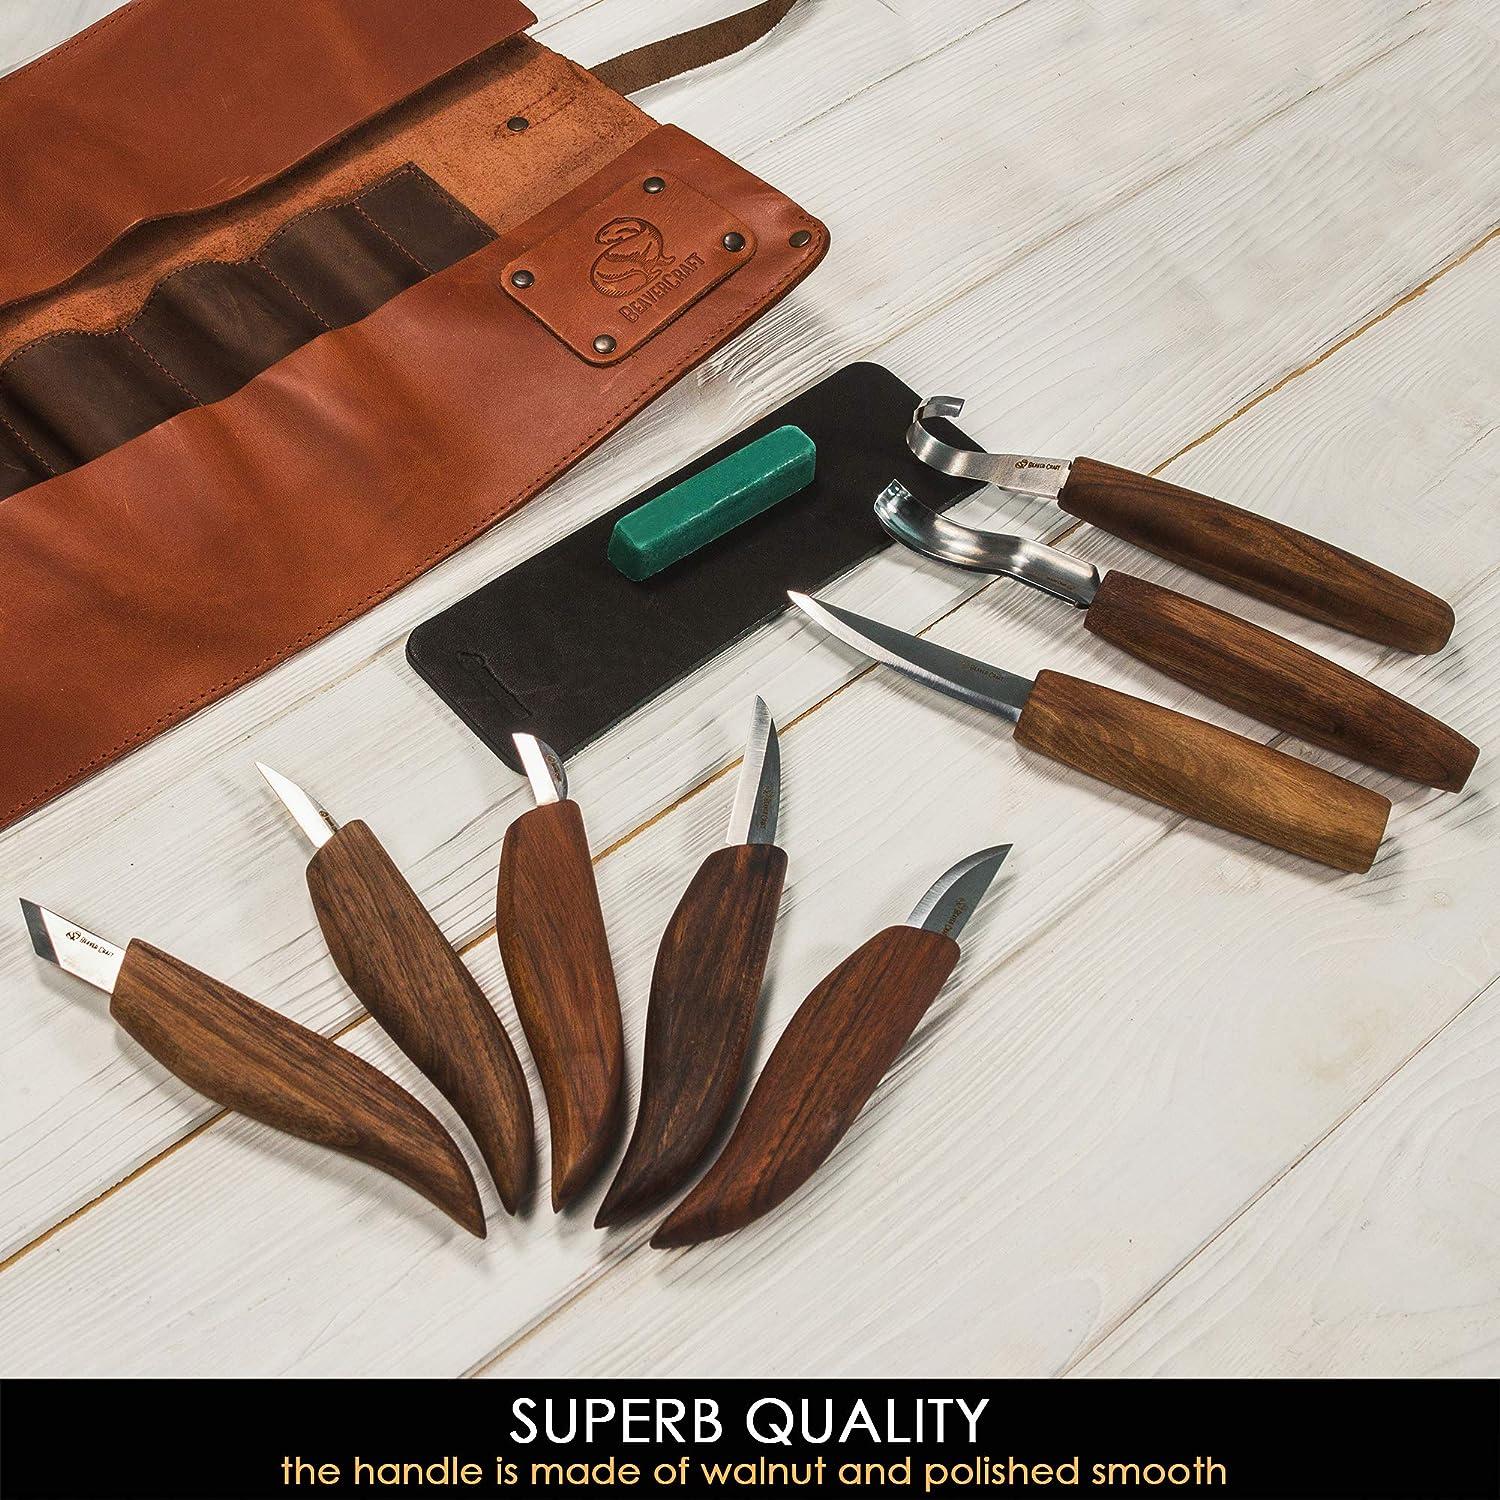 Wood Carving Knives Set Hand Tool Kit Carbon Steel Wood Carving